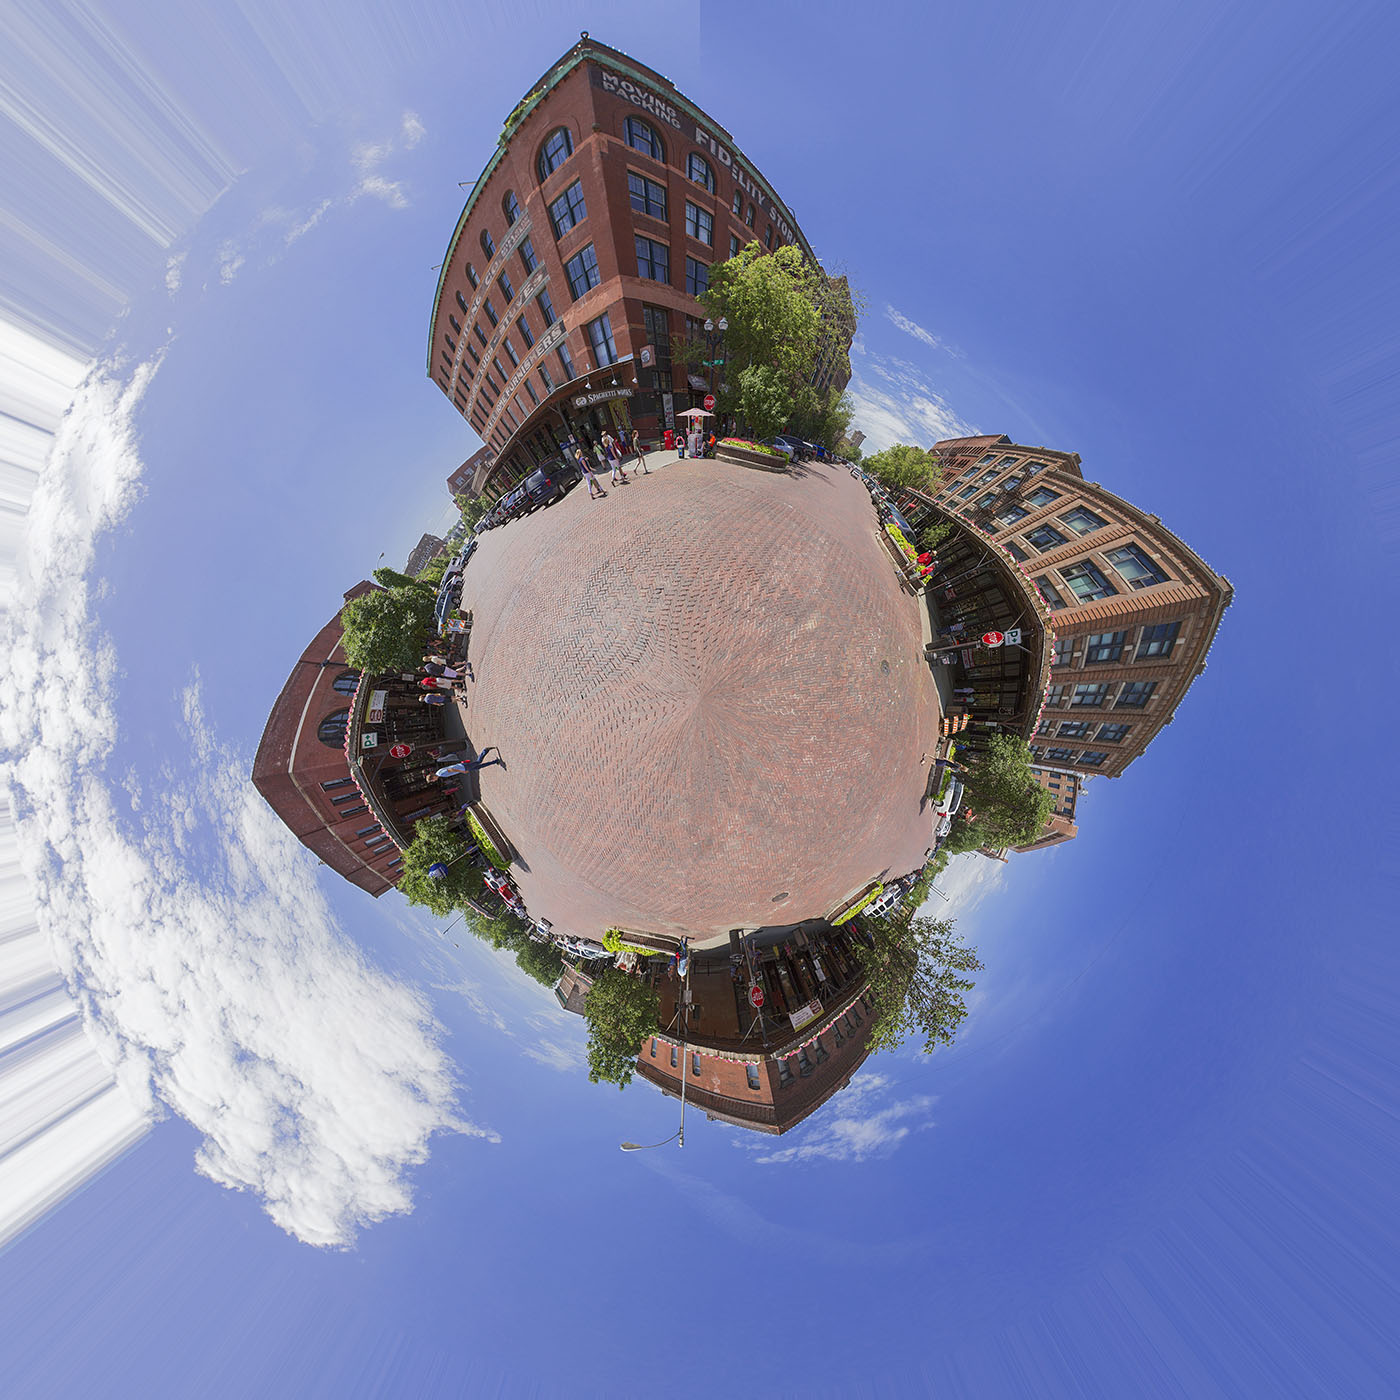 A 360 Degree Panoramic Photo of Omaha's Historic Old Market, warped in to a "world" or "globe".